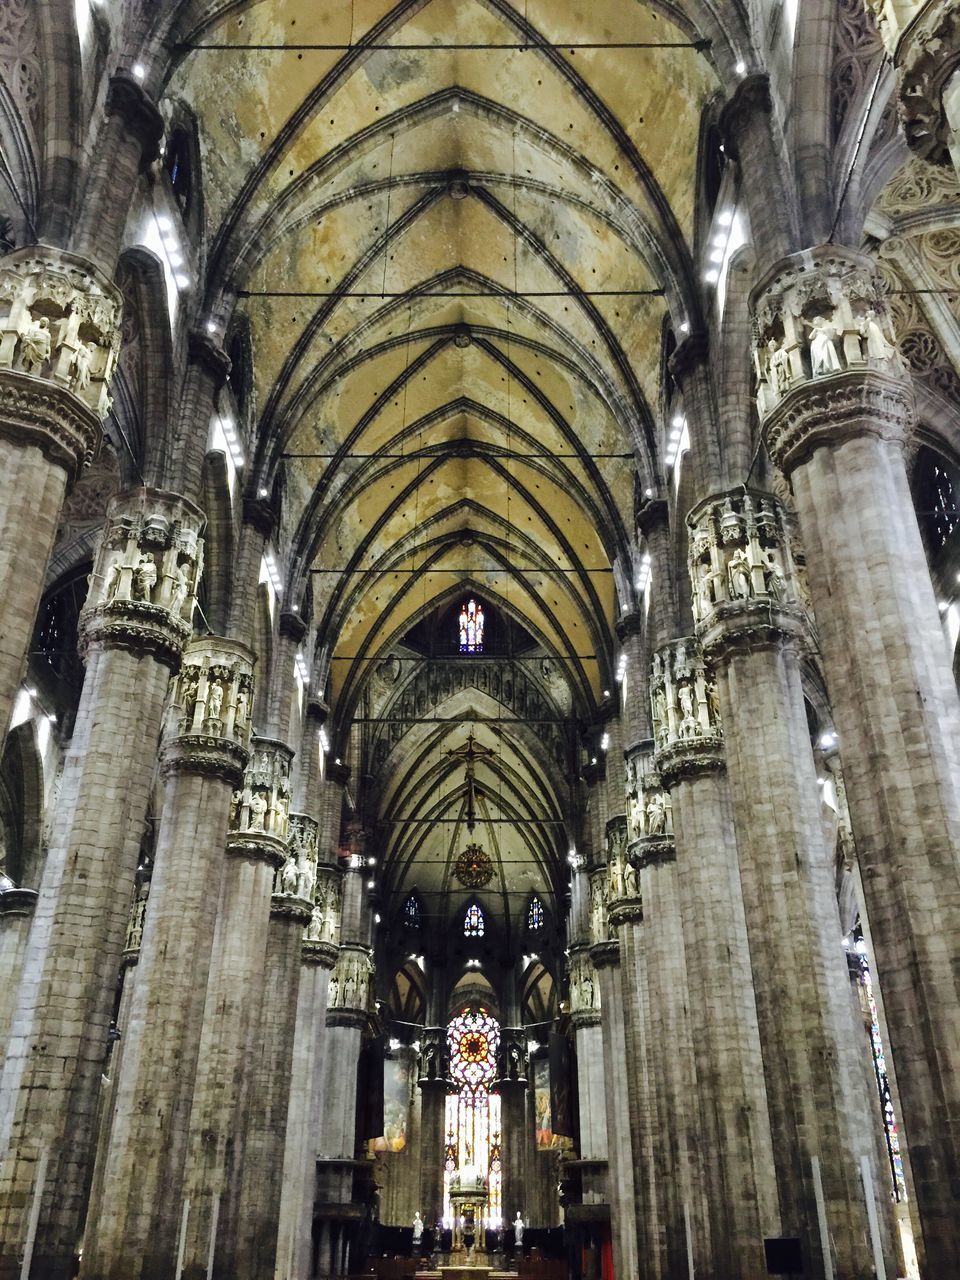 indoors, religion, place of worship, spirituality, arch, ceiling, architecture, church, built structure, cathedral, low angle view, interior, architectural feature, arcade, history, travel destinations, famous place, international landmark, tourism, ancient civilization, architectural column, culture, diminishing perspective, pew, capital cities, day, duomo di milano